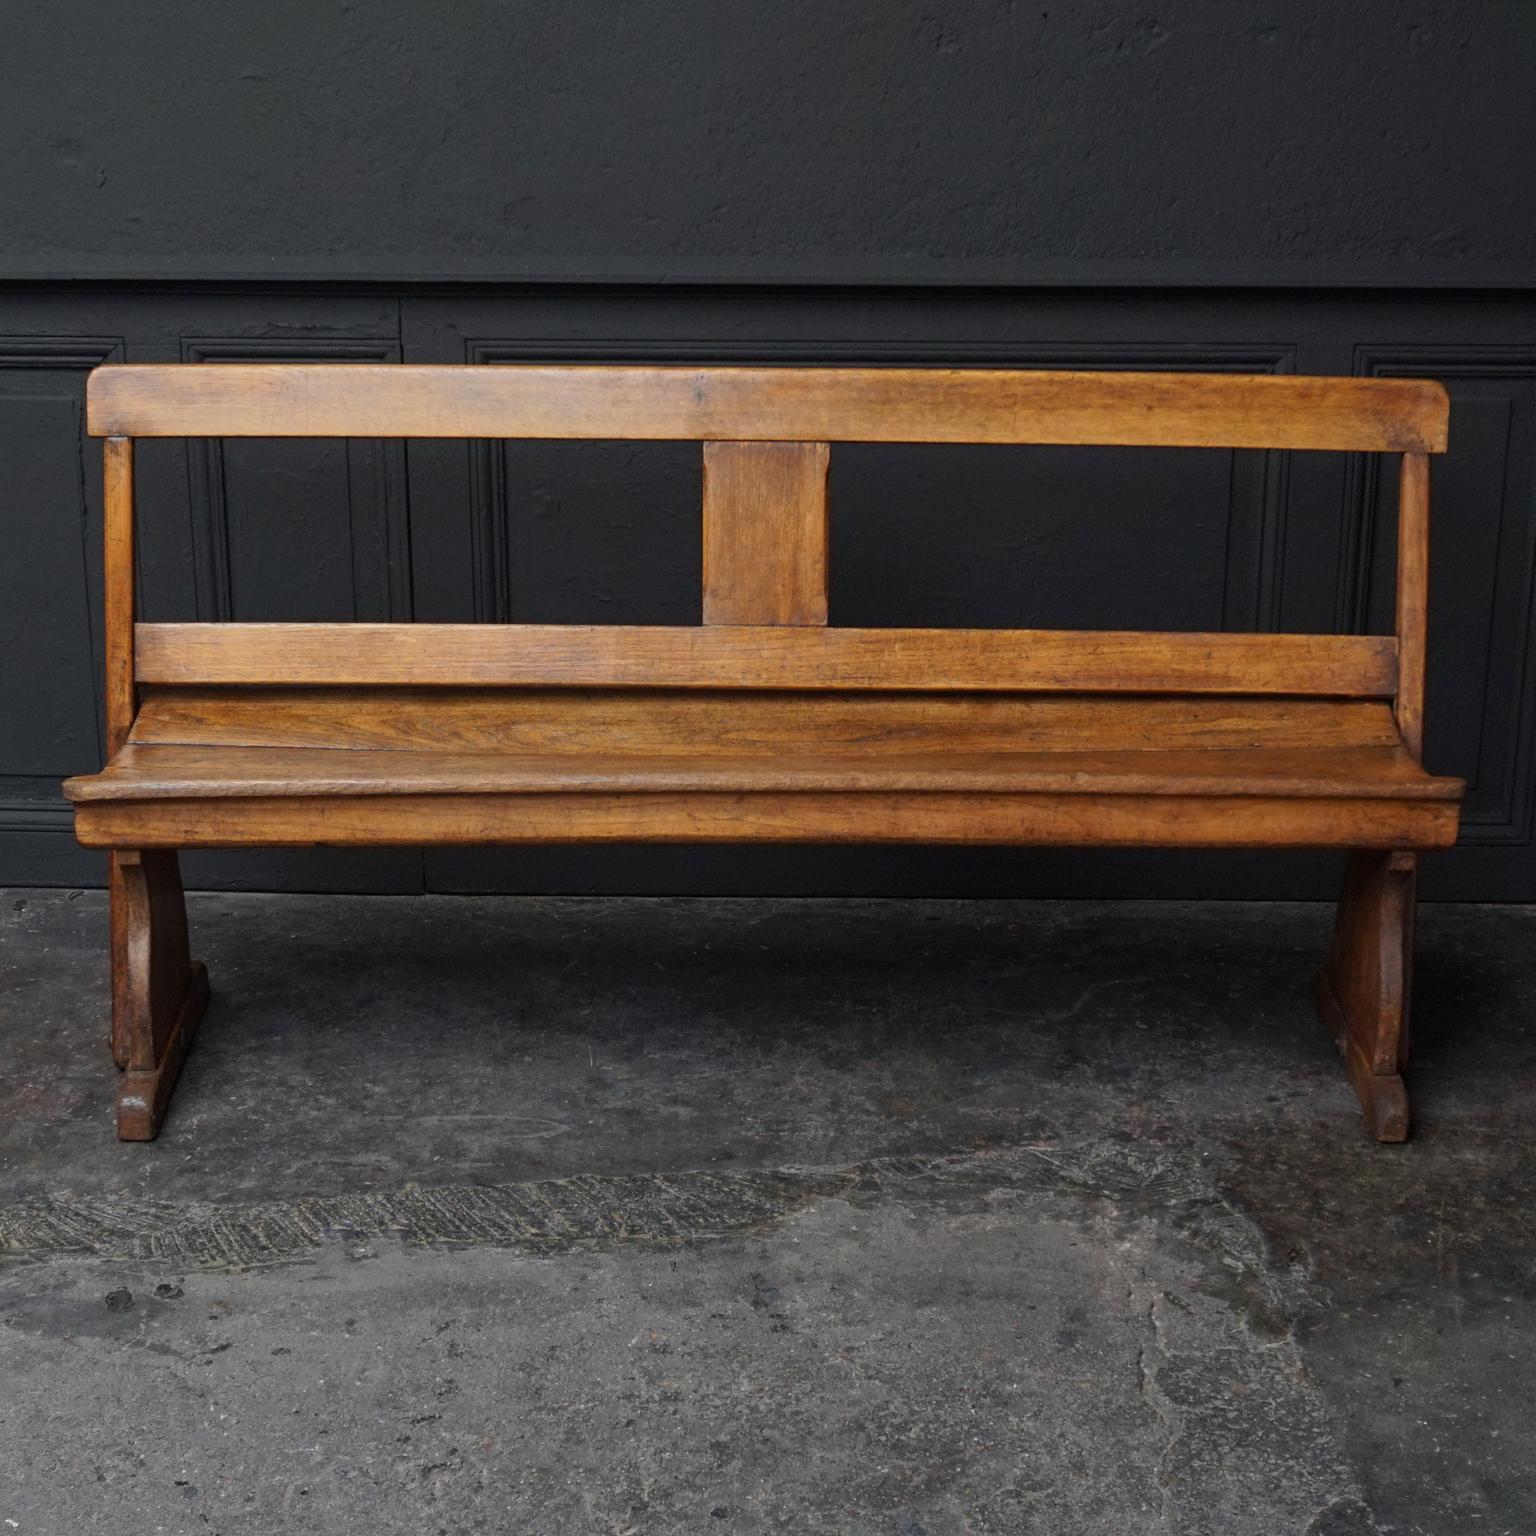 Imagine this pretty little 19th century oak bench in a kitchen, a hallway or on the patio.
It can be used from both sides by flipping the backrest, these flip benches are also known as Banc à tournis or Strycsitten.

These benches were very popular